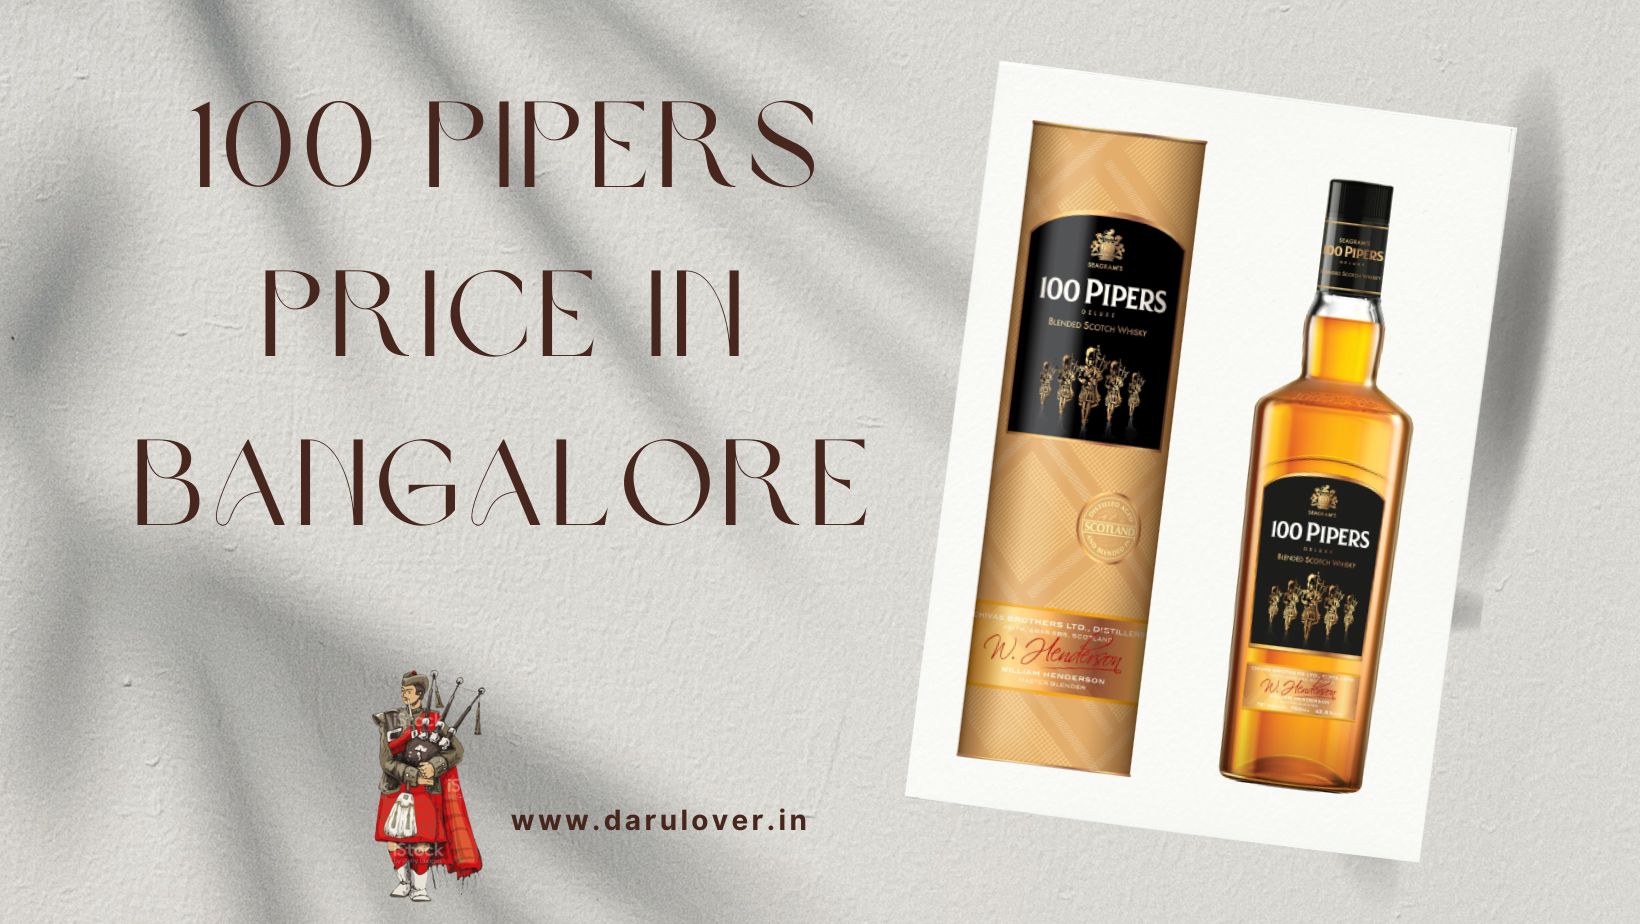 100 pipers price in Bangalore